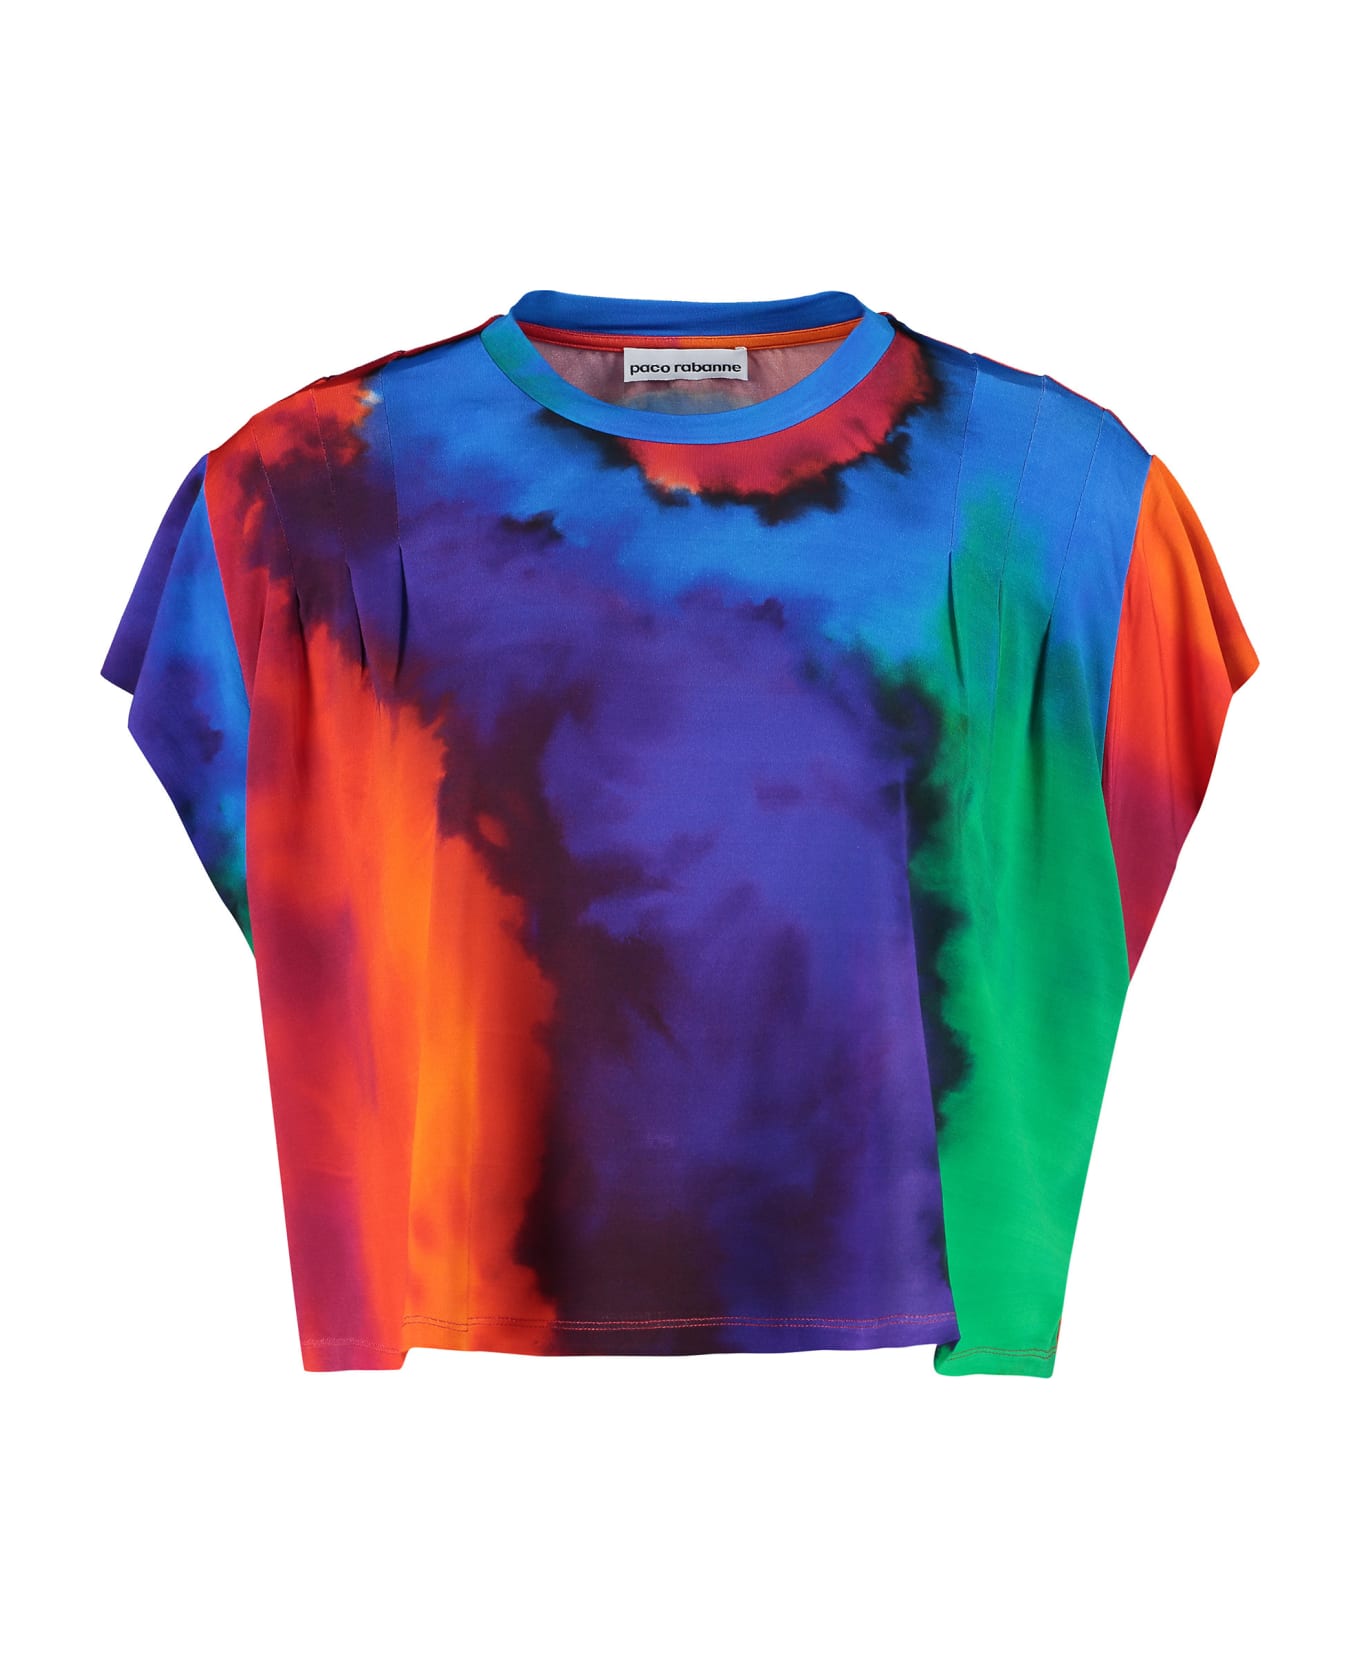 Paco Rabanne Printed T-shirt - Multicolor